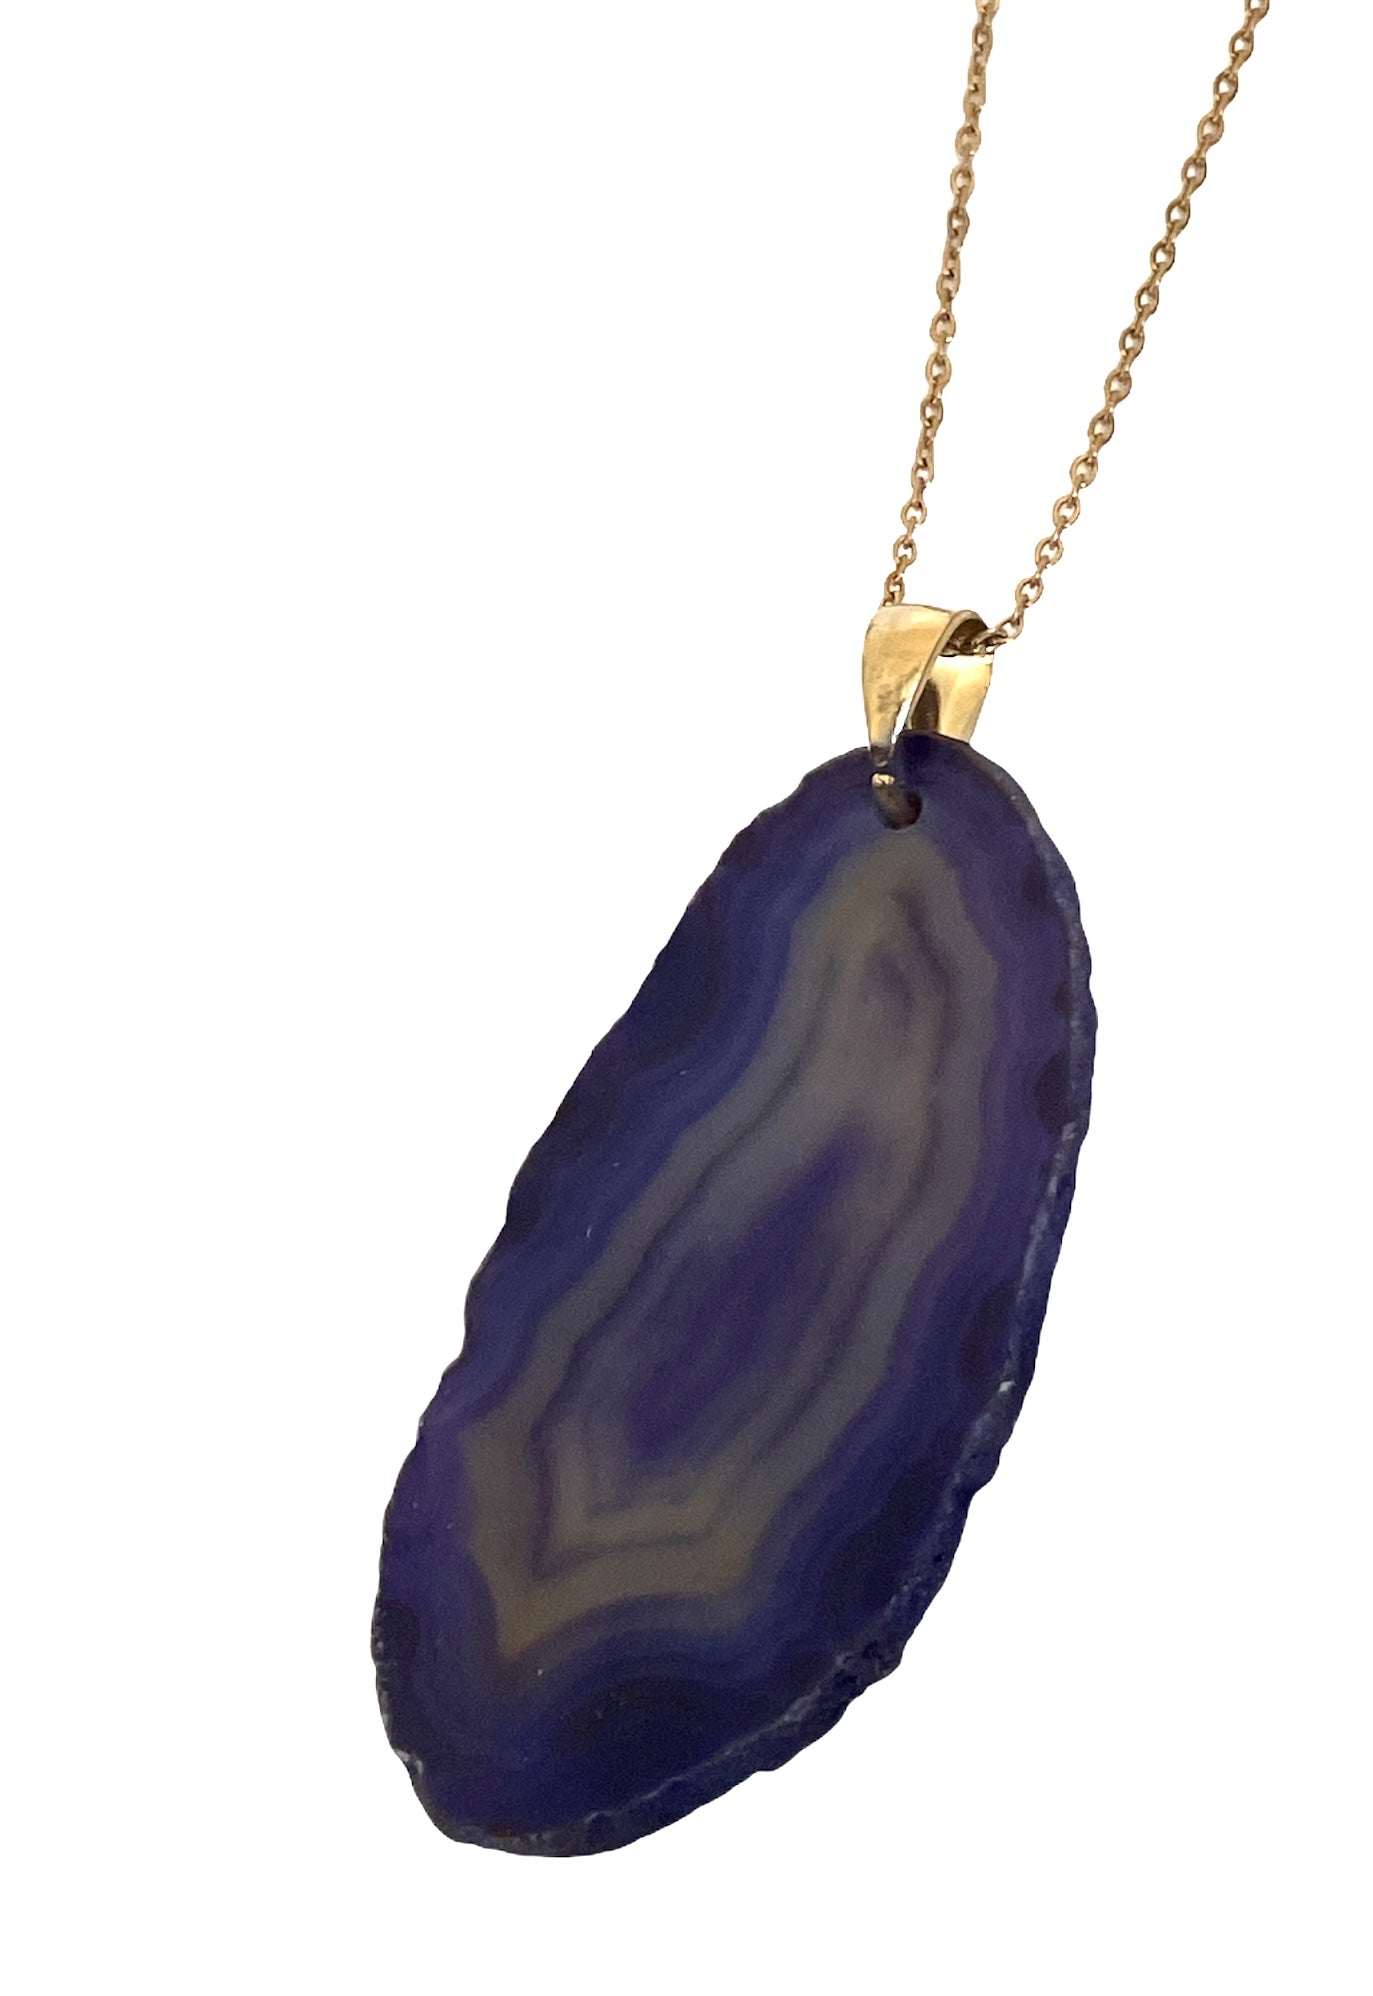 Necklace Agate Purple Patterned Raw Edge